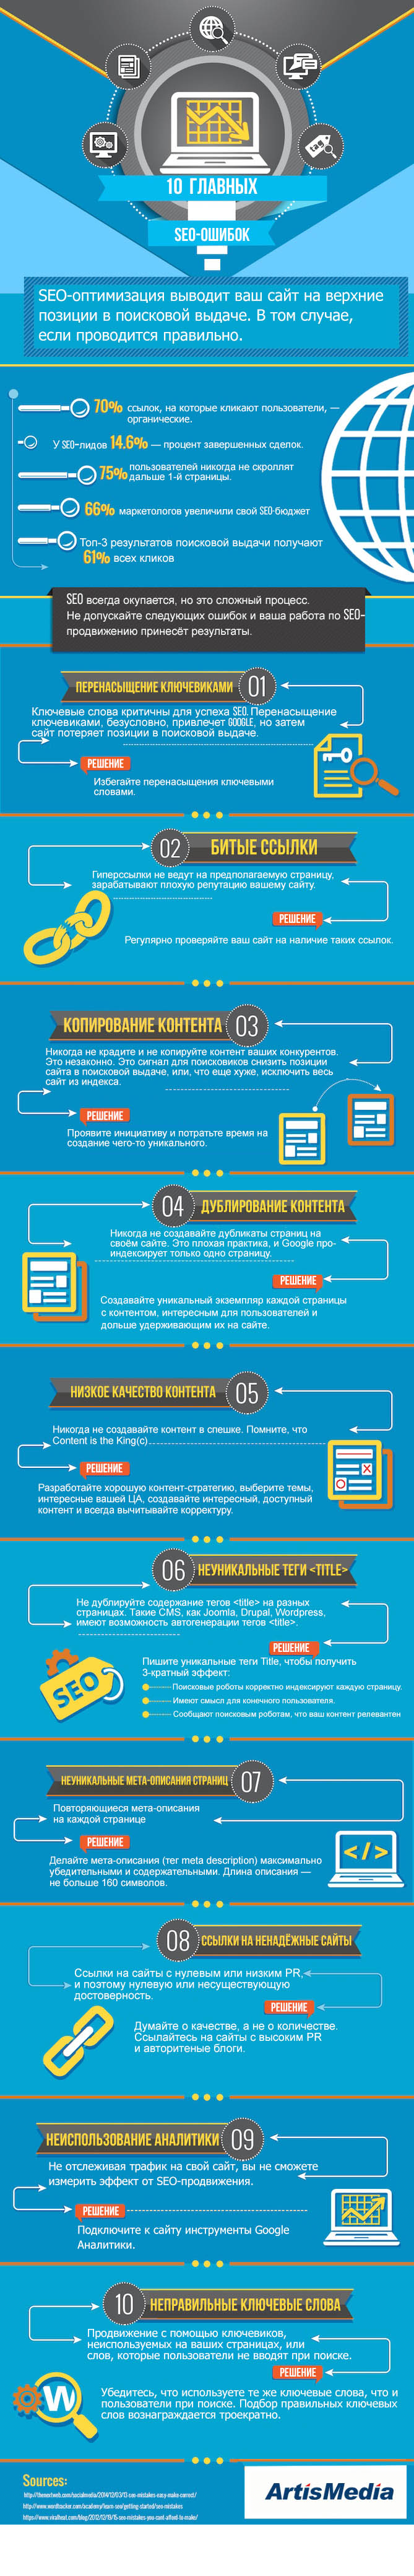 !!seo-mistakes-to-avoid-infographic